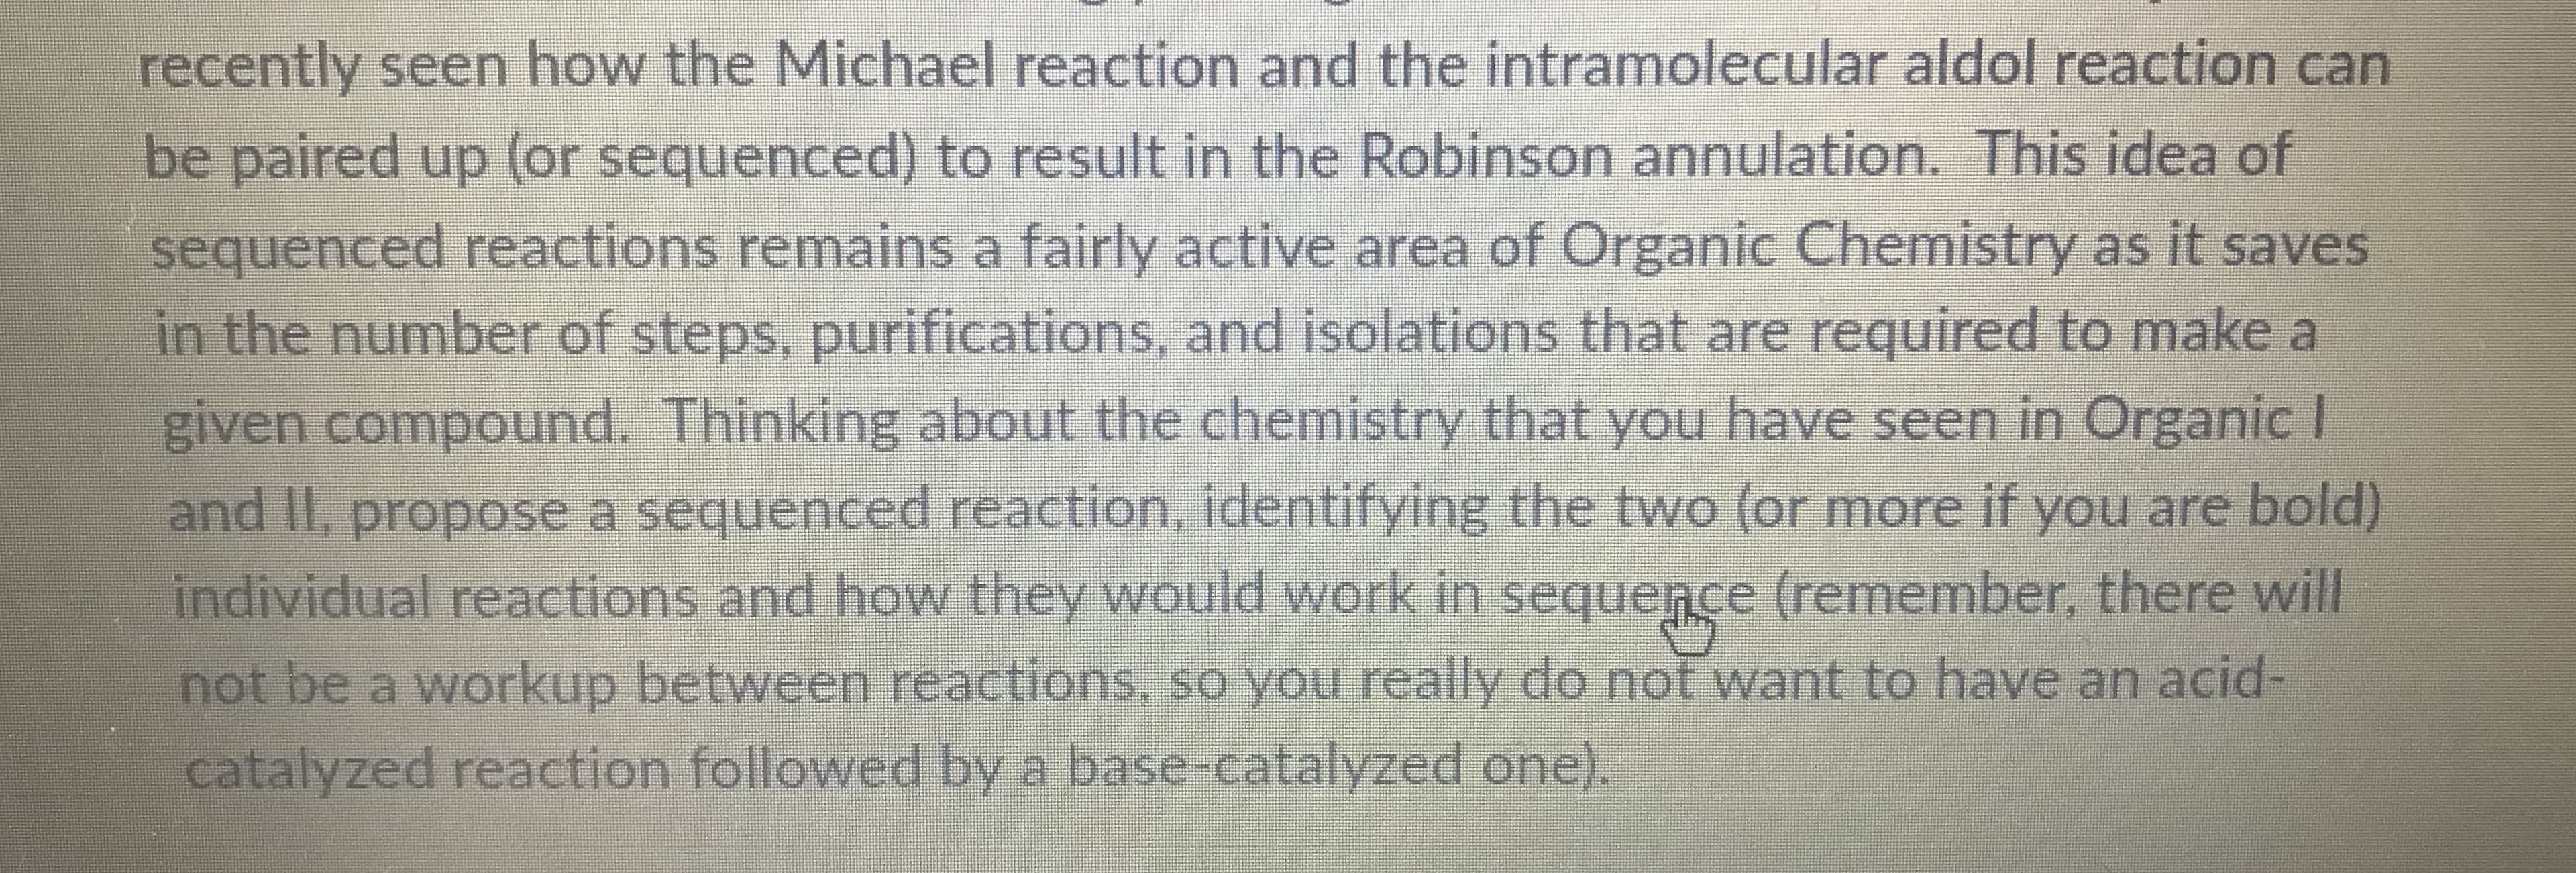 and II, propose a sequenced reaction, identifying the two (or more if you are bold)
individual reactions and ho they would work in sequence (remember, there will
not be a workup between reactions. so vou really do not want to have an acid-
catalyzed reaction followed by a base-catalyzed one).
